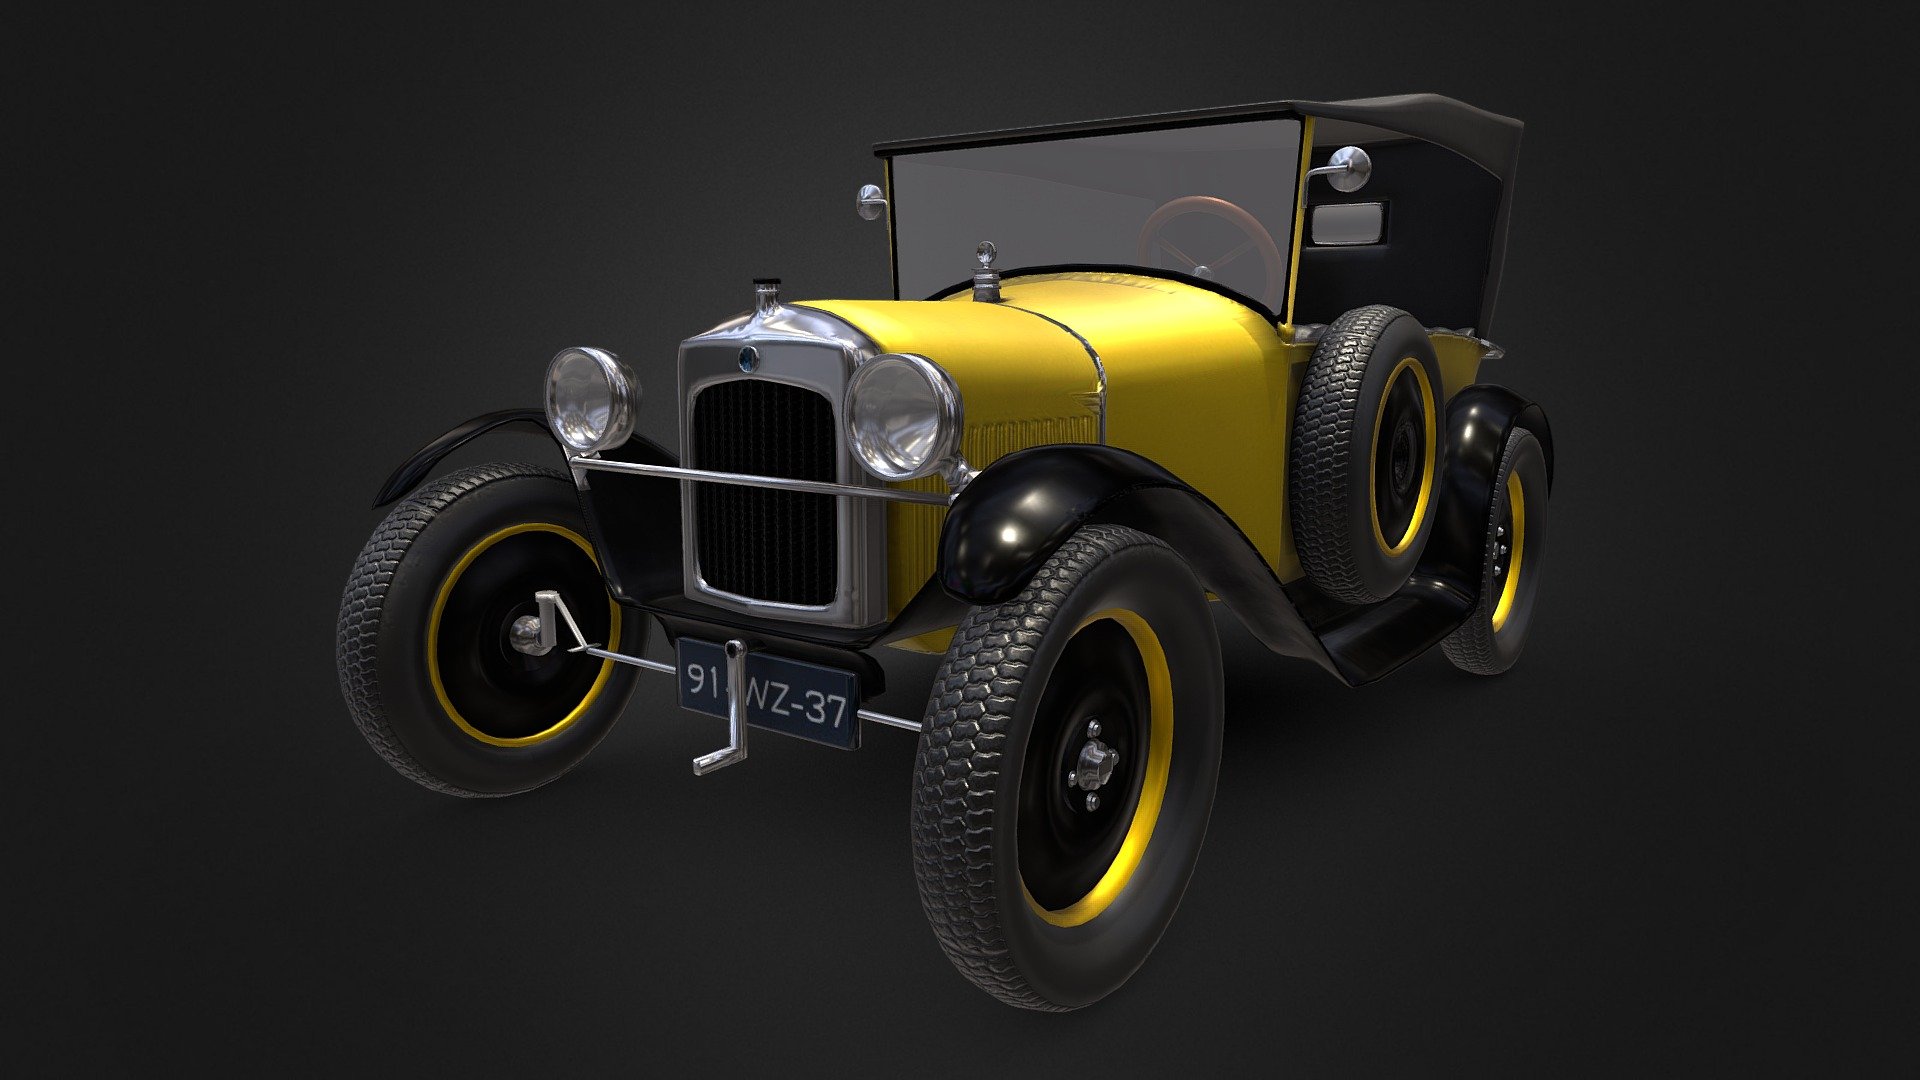 The Citroën Type C was a light car made by the French Citroën car company between 1922 and 1926 with almost 81,000 units being made. Known as Citroën 5HP or 5CV in France and 7.5HP in Britain, it was the second model of automobile designed and marketed by André Citroën, between 1922 and 1926. It followed the 10HP &ldquo;Type A 